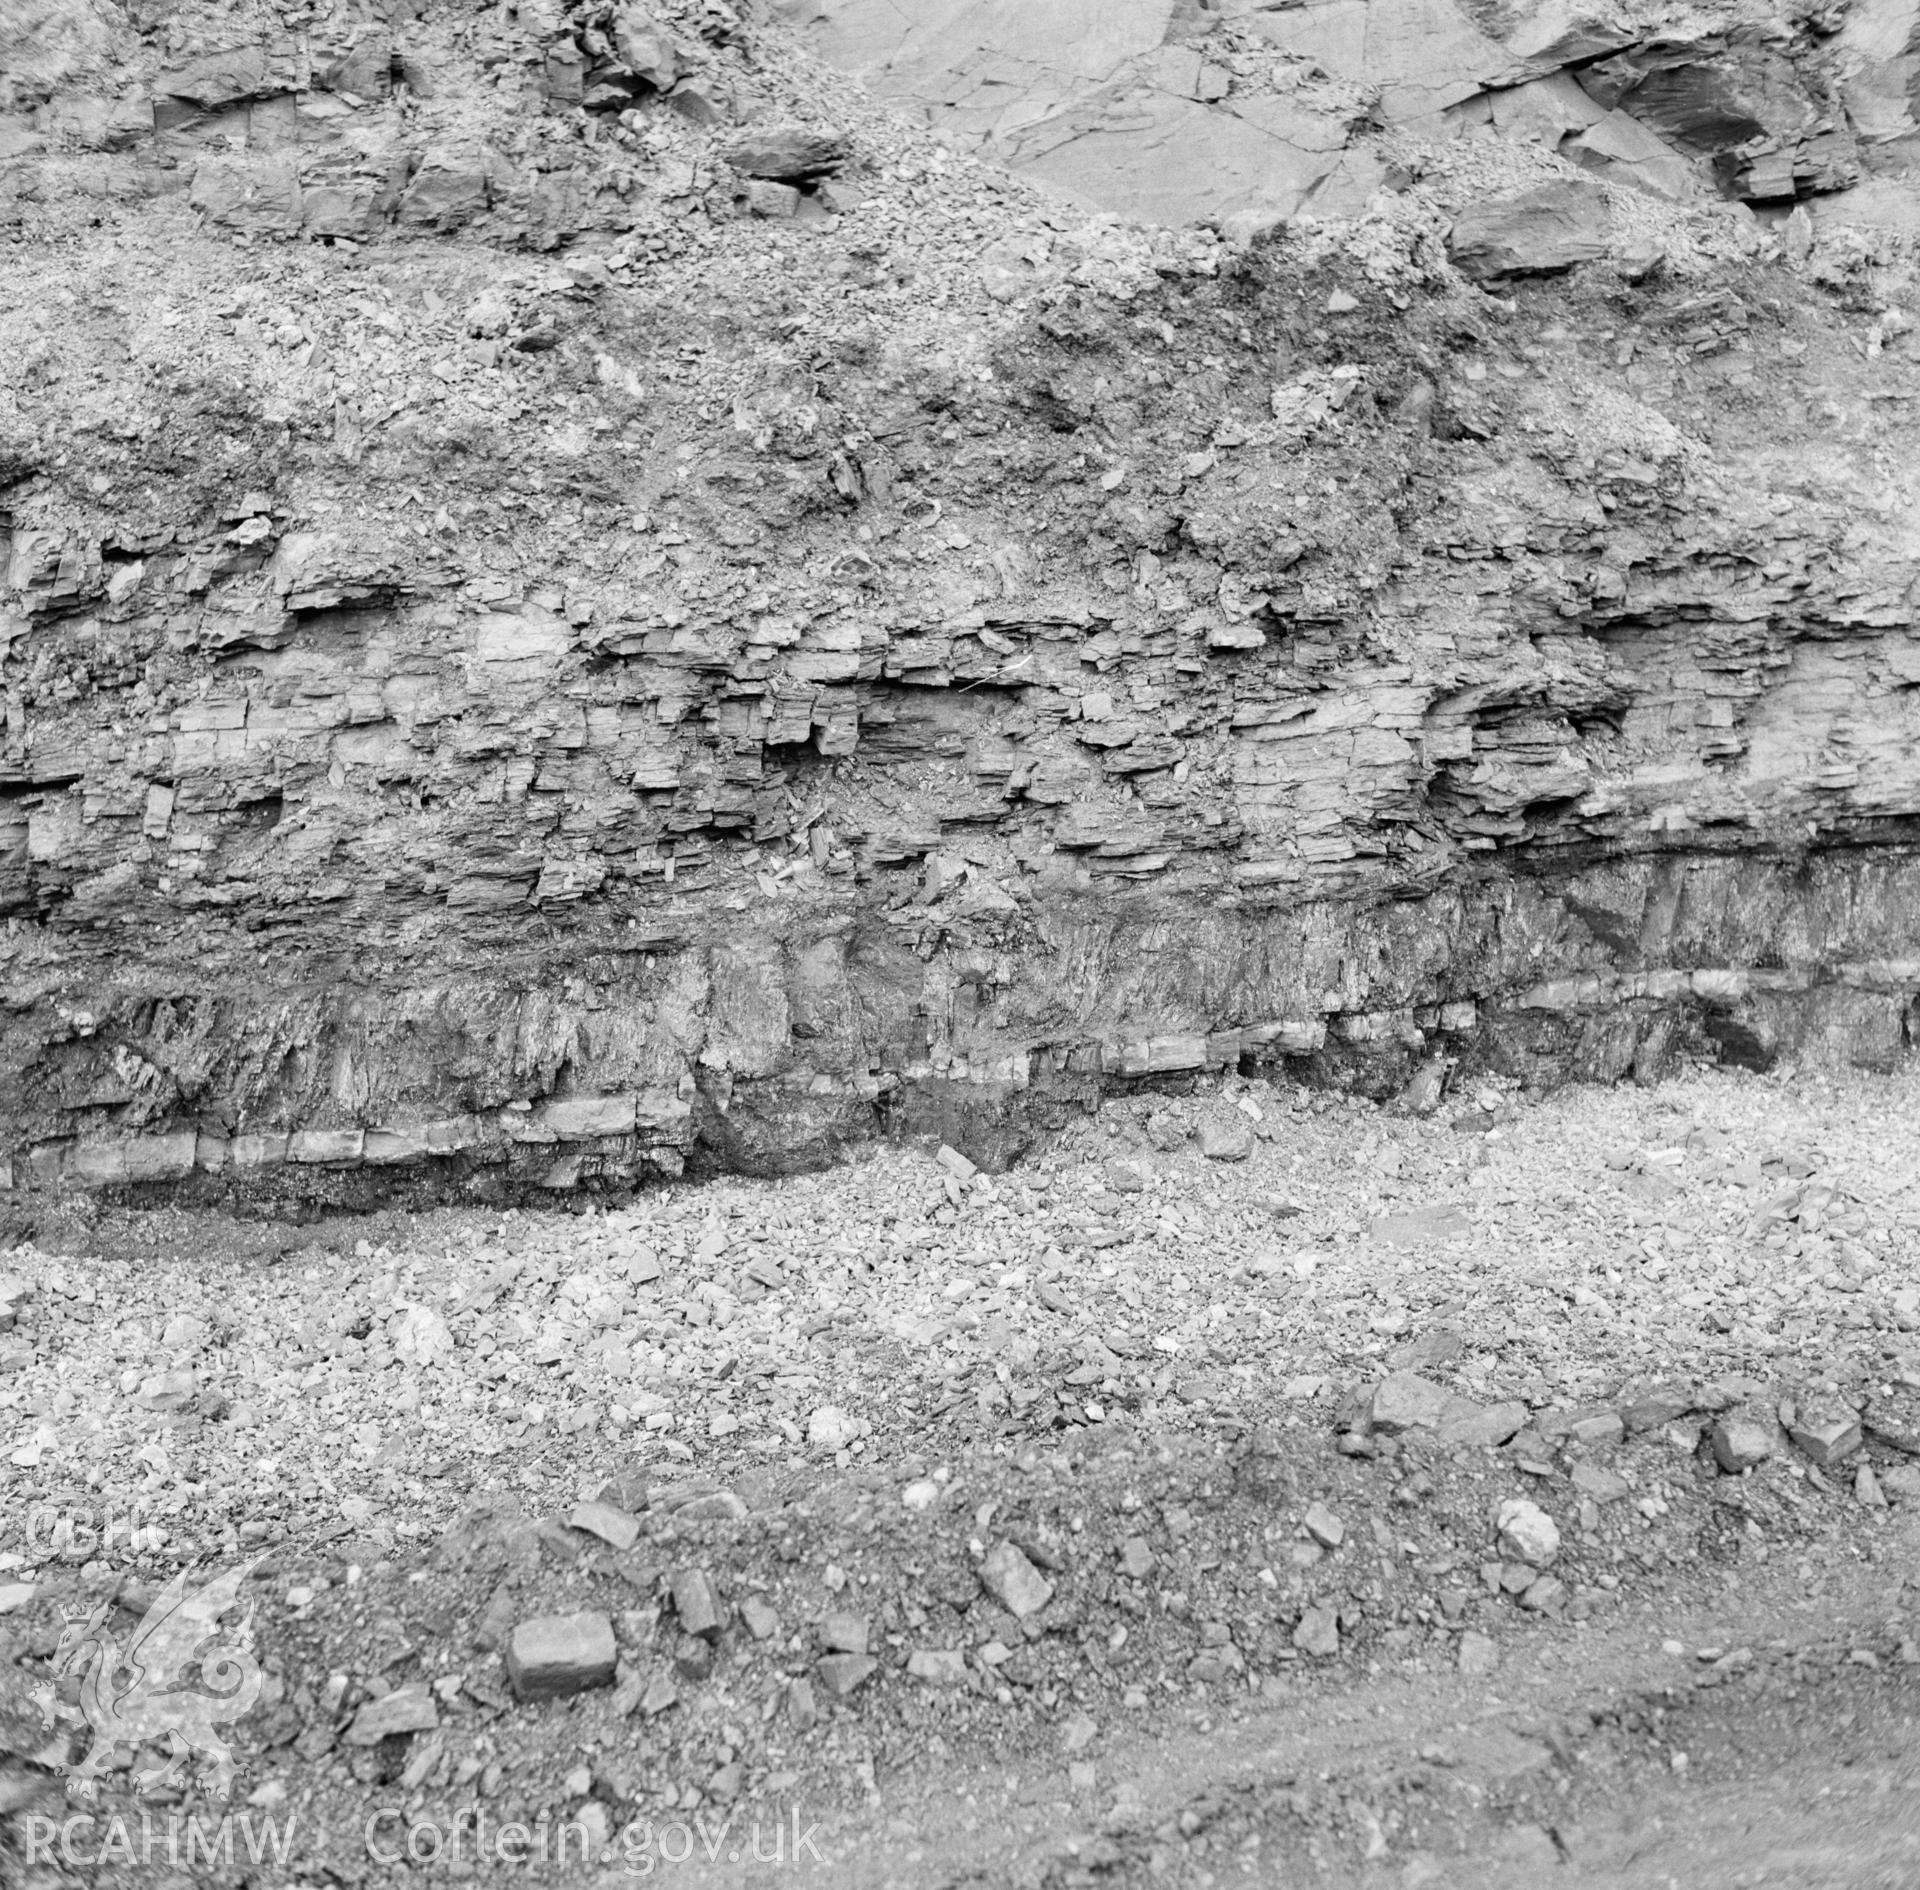 Digital copy of a black and white negative showing view of trench seam at Dowlais Top Opencast Mine, taken by Douglas Hague, undated.